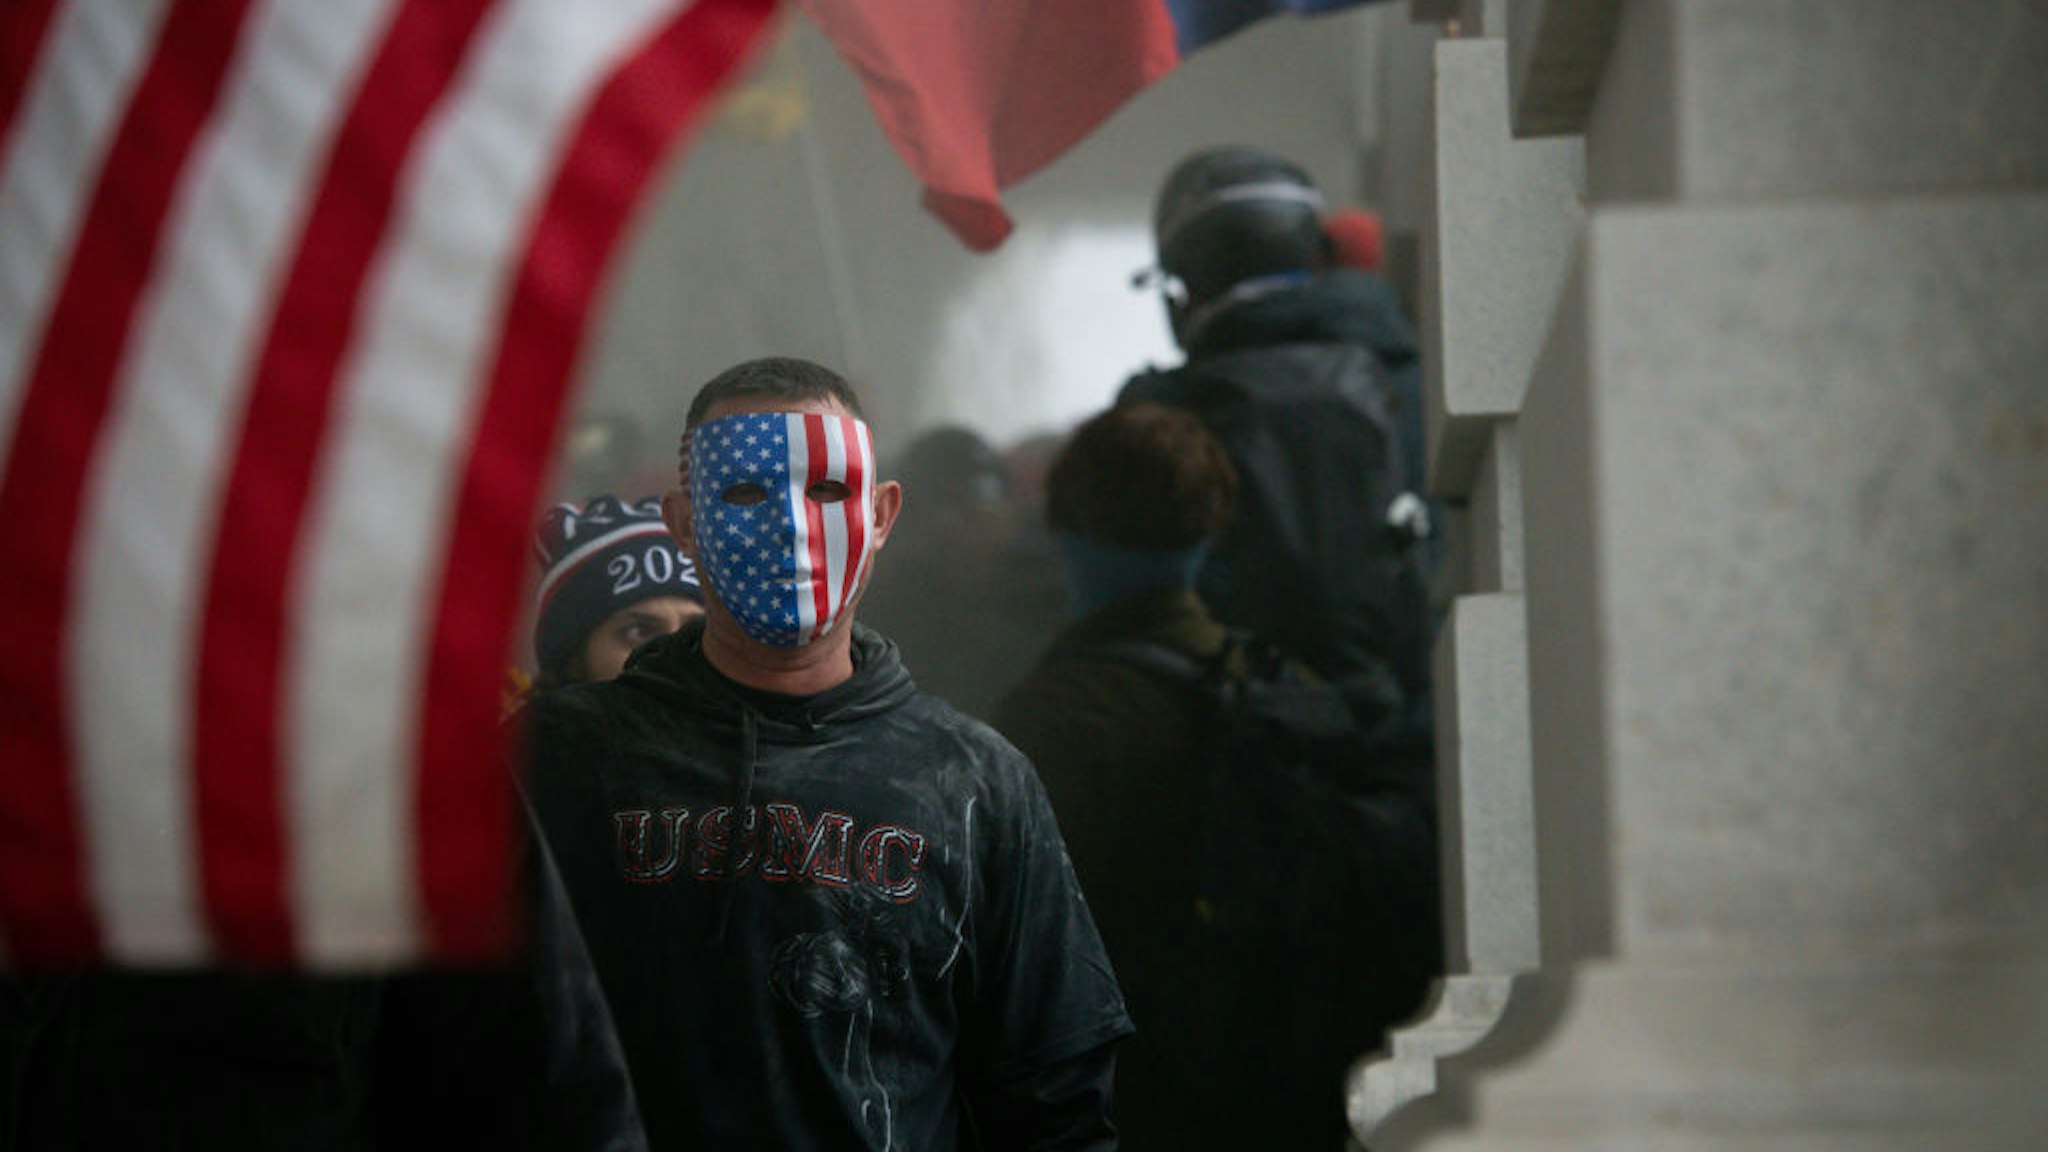 A demonstrator wears an American flag mask during a protest at the U.S. Capitol in Washington, D.C., U.S., on Jan. 6, 2021. The U.S. Capitol was placed under lockdown and Vice President Mike Pence left the floor of Congress as hundreds of protesters swarmed past barricades surrounding the building where lawmakers were debating Joe Biden's victory in the Electoral College. Photographer: Graeme Sloan/Bloomberg via Getty Images